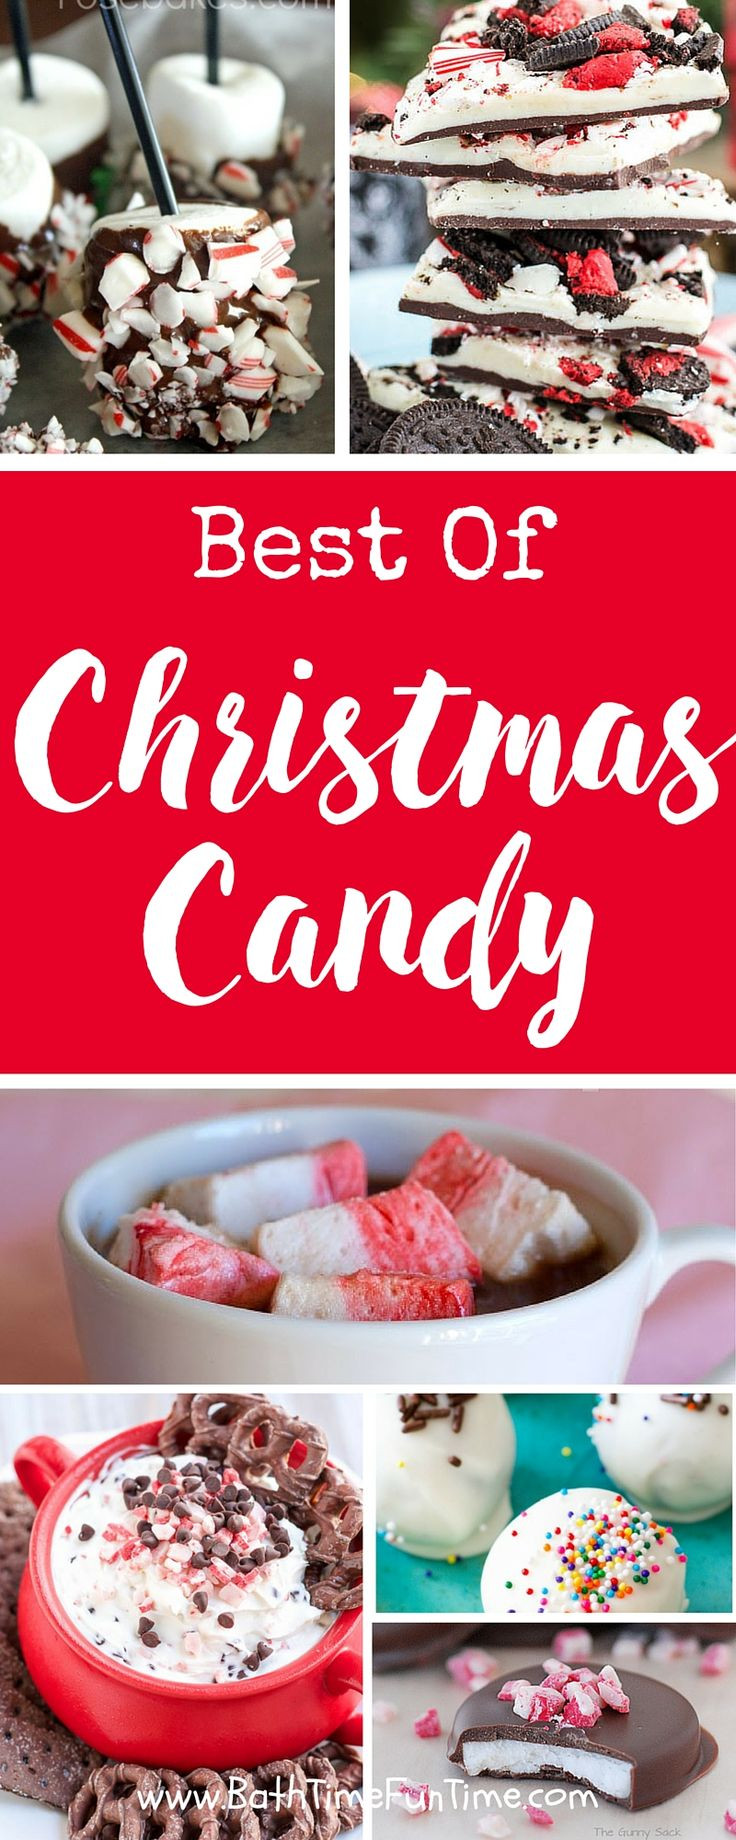 Popular Christmas Candy
 1000 images about Best of BathTimeFunTime on